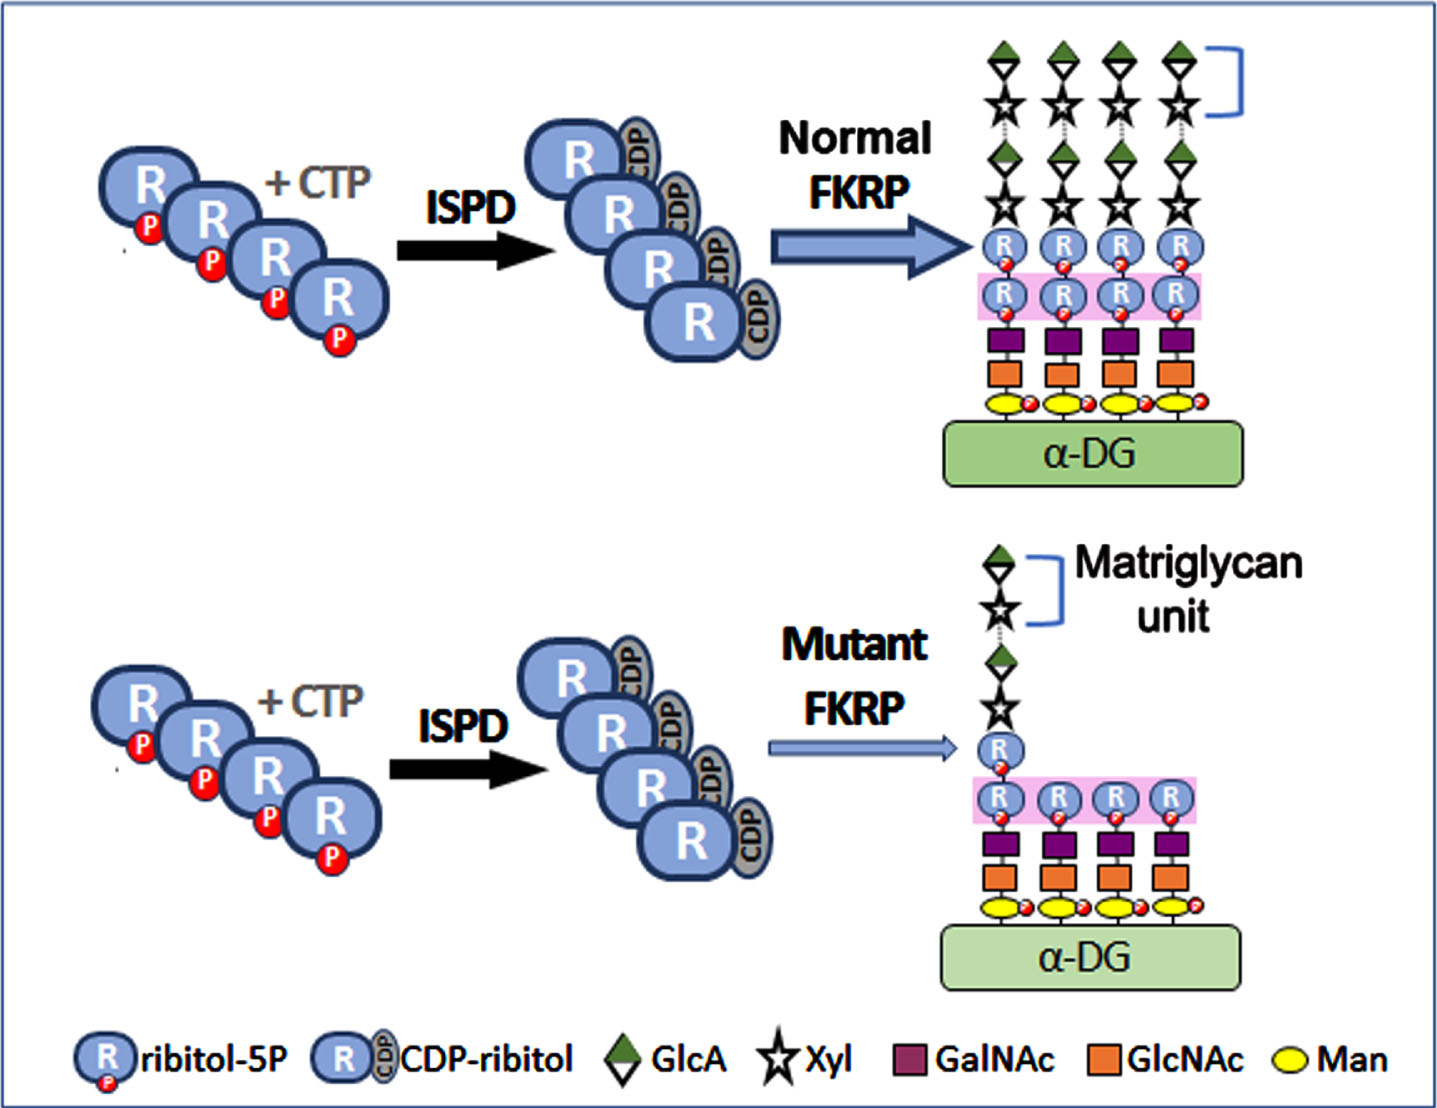 Effect of Normal and mutant FKRP function on glycosylation of α-DG. The structure of the laminin-binding O-mannosylated glycan of α-DG is delineated with the following chain: (3GlcA-β1-3Xyl-α1) n-3GlcA- β1-4Xyl-Rbo5P-1Rbo5P-3GalNAc- β1-3GlcNAc- β1-4(P-6) Man-1-Thr/ser. POMT1 and POMT2 catalyze the initial O-mannosylation. This is followed by the addition of GlcNAc, GalNAc and the first ribitol-5-phosphate (ribitol-5P) carried out by POMGnT2 (GTDC2), B3GALNT2 and FKTN respectively. FKRP adds a second ribitol-5P. The first Xyl and GlcA are added by TMEM5 and B4GAT1 successively. Finally, LARGE acts as a bifunctional glycosyltransferase having both xylosyltransferase and glucuronyltransferase activities, producing a repeated matriglycan units of 3Xylα1,3-GlcAβ1. ISPD is essential for synthesizing CDP-ribitol, the donor substrate for both FKRP and FKTN. FKRP with missense mutations retains partial function. Abbreviations: CTP, cytidine triphosphate; CDP, cytidine diphosphate; GalNAc, N-acetylgalactosamine; GlcA, glucuronic acid; GlcNAc, N-acetylglucosamine; Man, mannose; P, phosphate; Xyl, xylose; ISPD, isoprenoid synthase domain containing; FKTN, Fukutin; FKRP, Fukutin related protein.